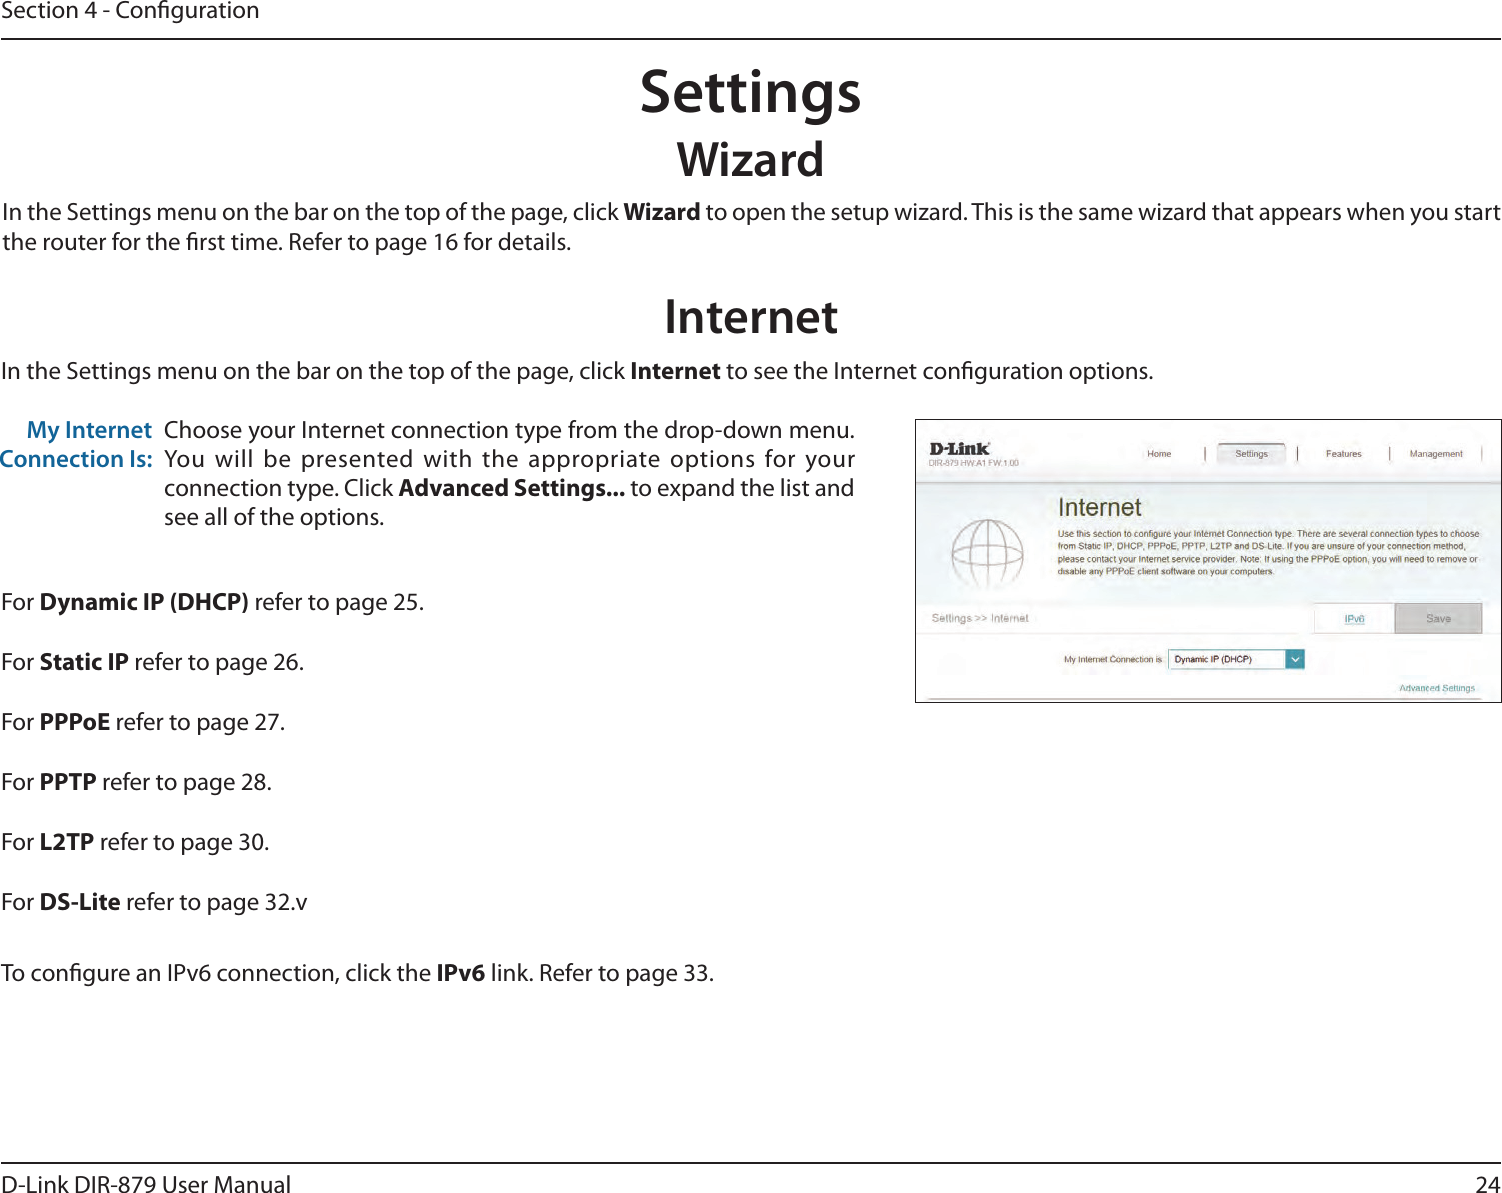 24D-Link DIR-879 User ManualSection 4 - CongurationSettingsWizardInternetIn the Settings menu on the bar on the top of the page, click Wizard to open the setup wizard. This is the same wizard that appears when you start the router for the rst time. Refer to page 16 for details.In the Settings menu on the bar on the top of the page, click Internet to see the Internet conguration options.Choose your Internet connection type from the drop-down menu. You will be presented with the appropriate options for your connection type. Click Advanced Settings... to expand the list and see all of the options.My Internet Connection Is:For Dynamic IP (DHCP) refer to page 25.For Static IP refer to page 26.For PPPoE refer to page 27.For PPTP refer to page 28.For L2TP refer to page 30.For DS-Lite refer to page 32.vTo congure an IPv6 connection, click the IPv6 link. Refer to page 33.